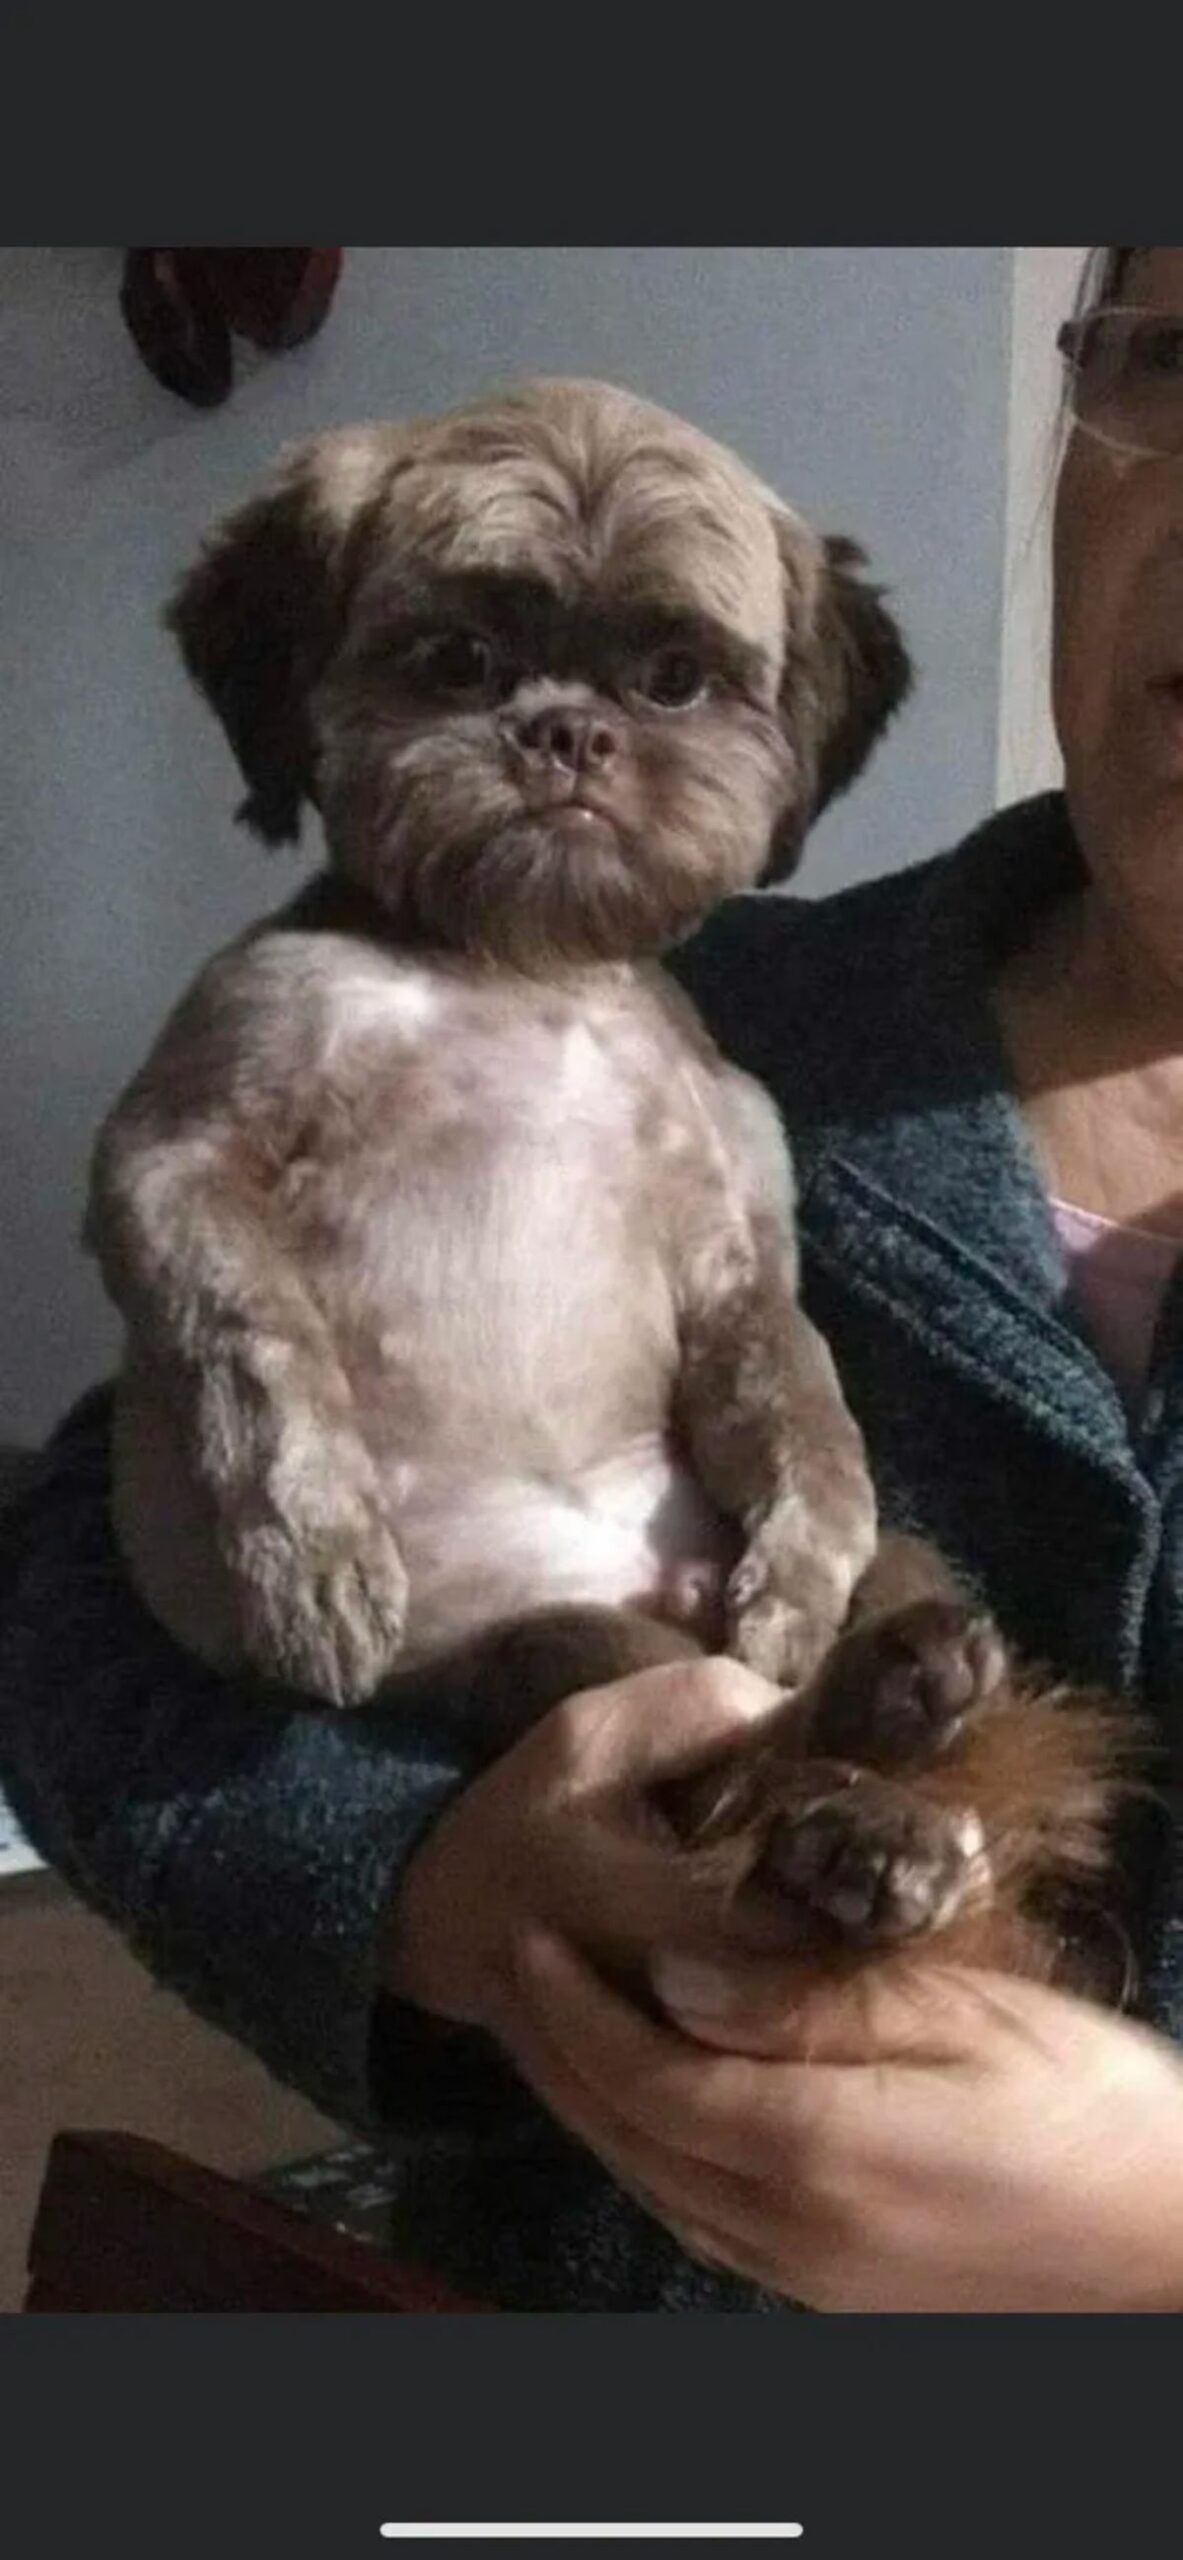 small brown terrier sitting upright in someone's arms looking confused